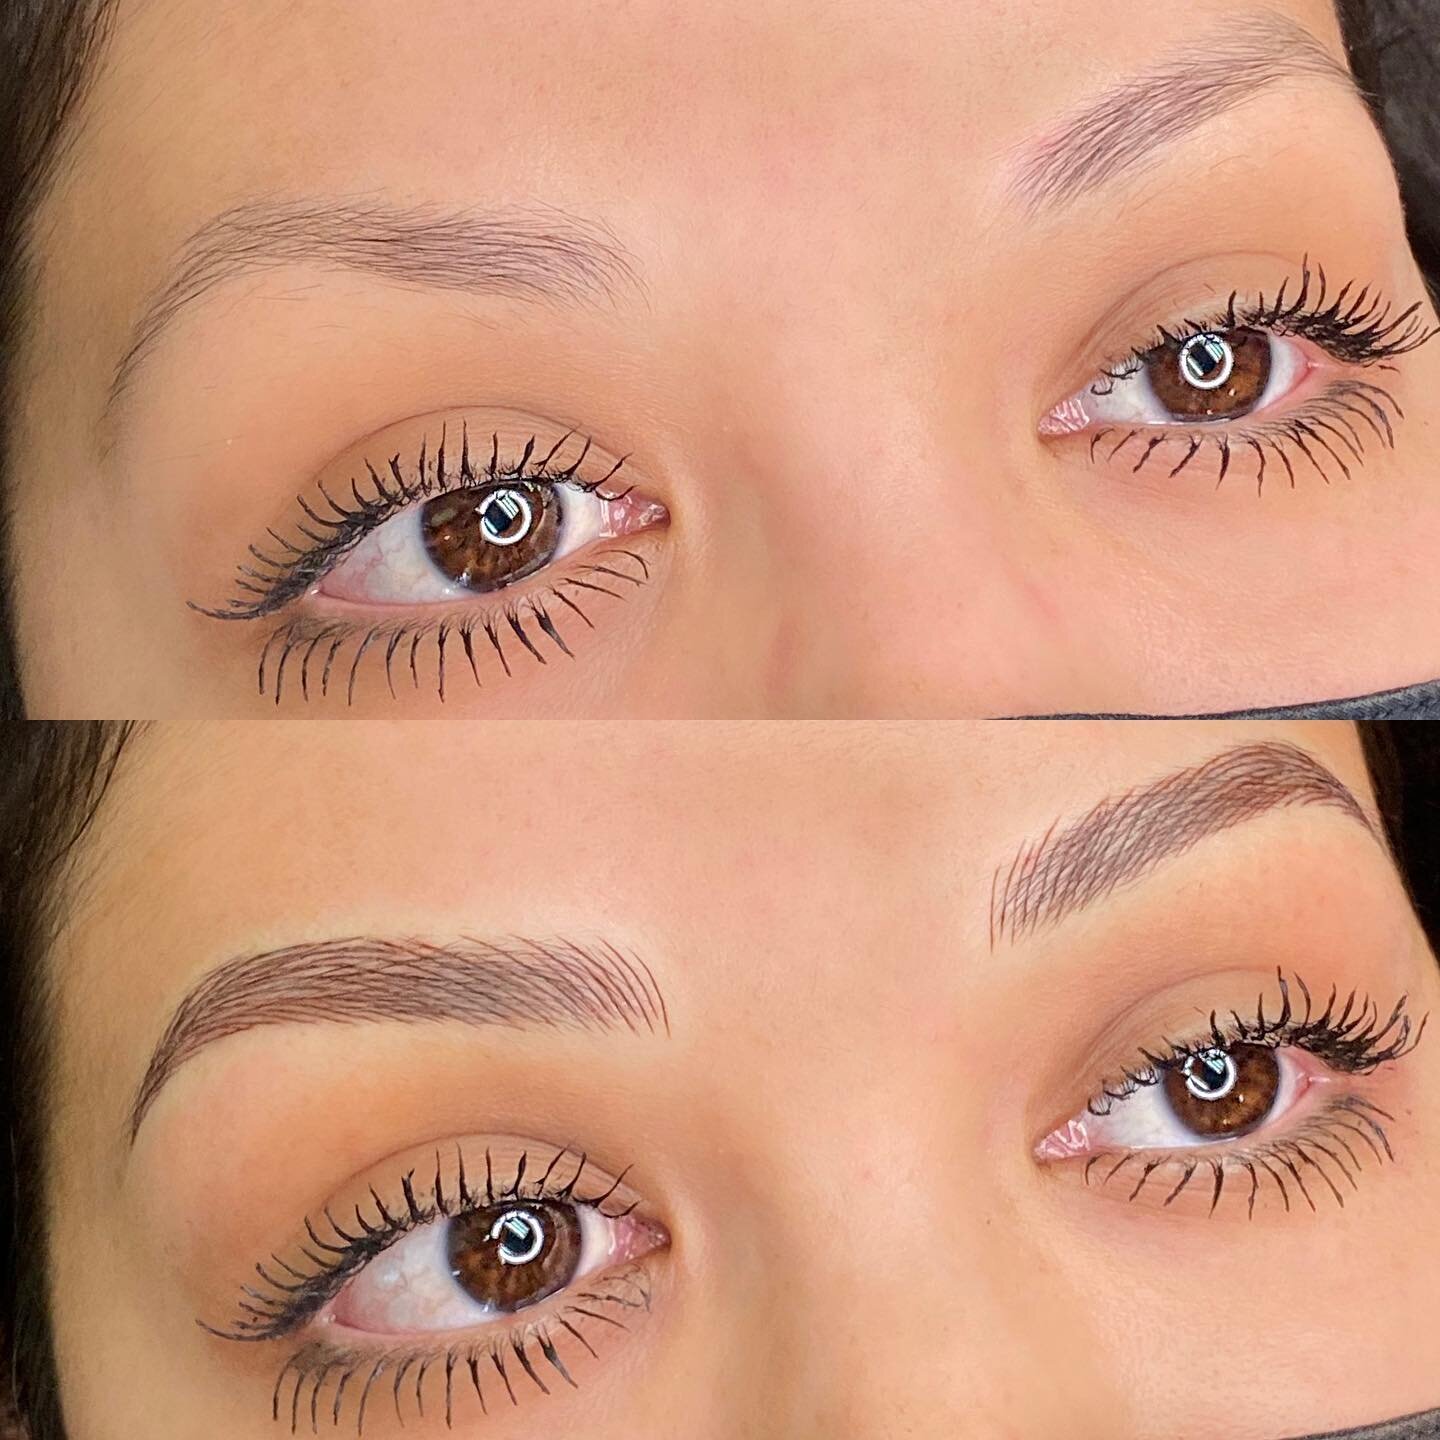 It just doesn&rsquo;t get any prettier than this 🥰🥰🥰
&bull;
✨ Style: Microblading
⏰ Time: 2-2.5 hours
🔥 Pain level: Minimal to none. 2 topical anesthetics are applied before &amp; during your procedure to keep you comfortable
💰 Price: $550 with 